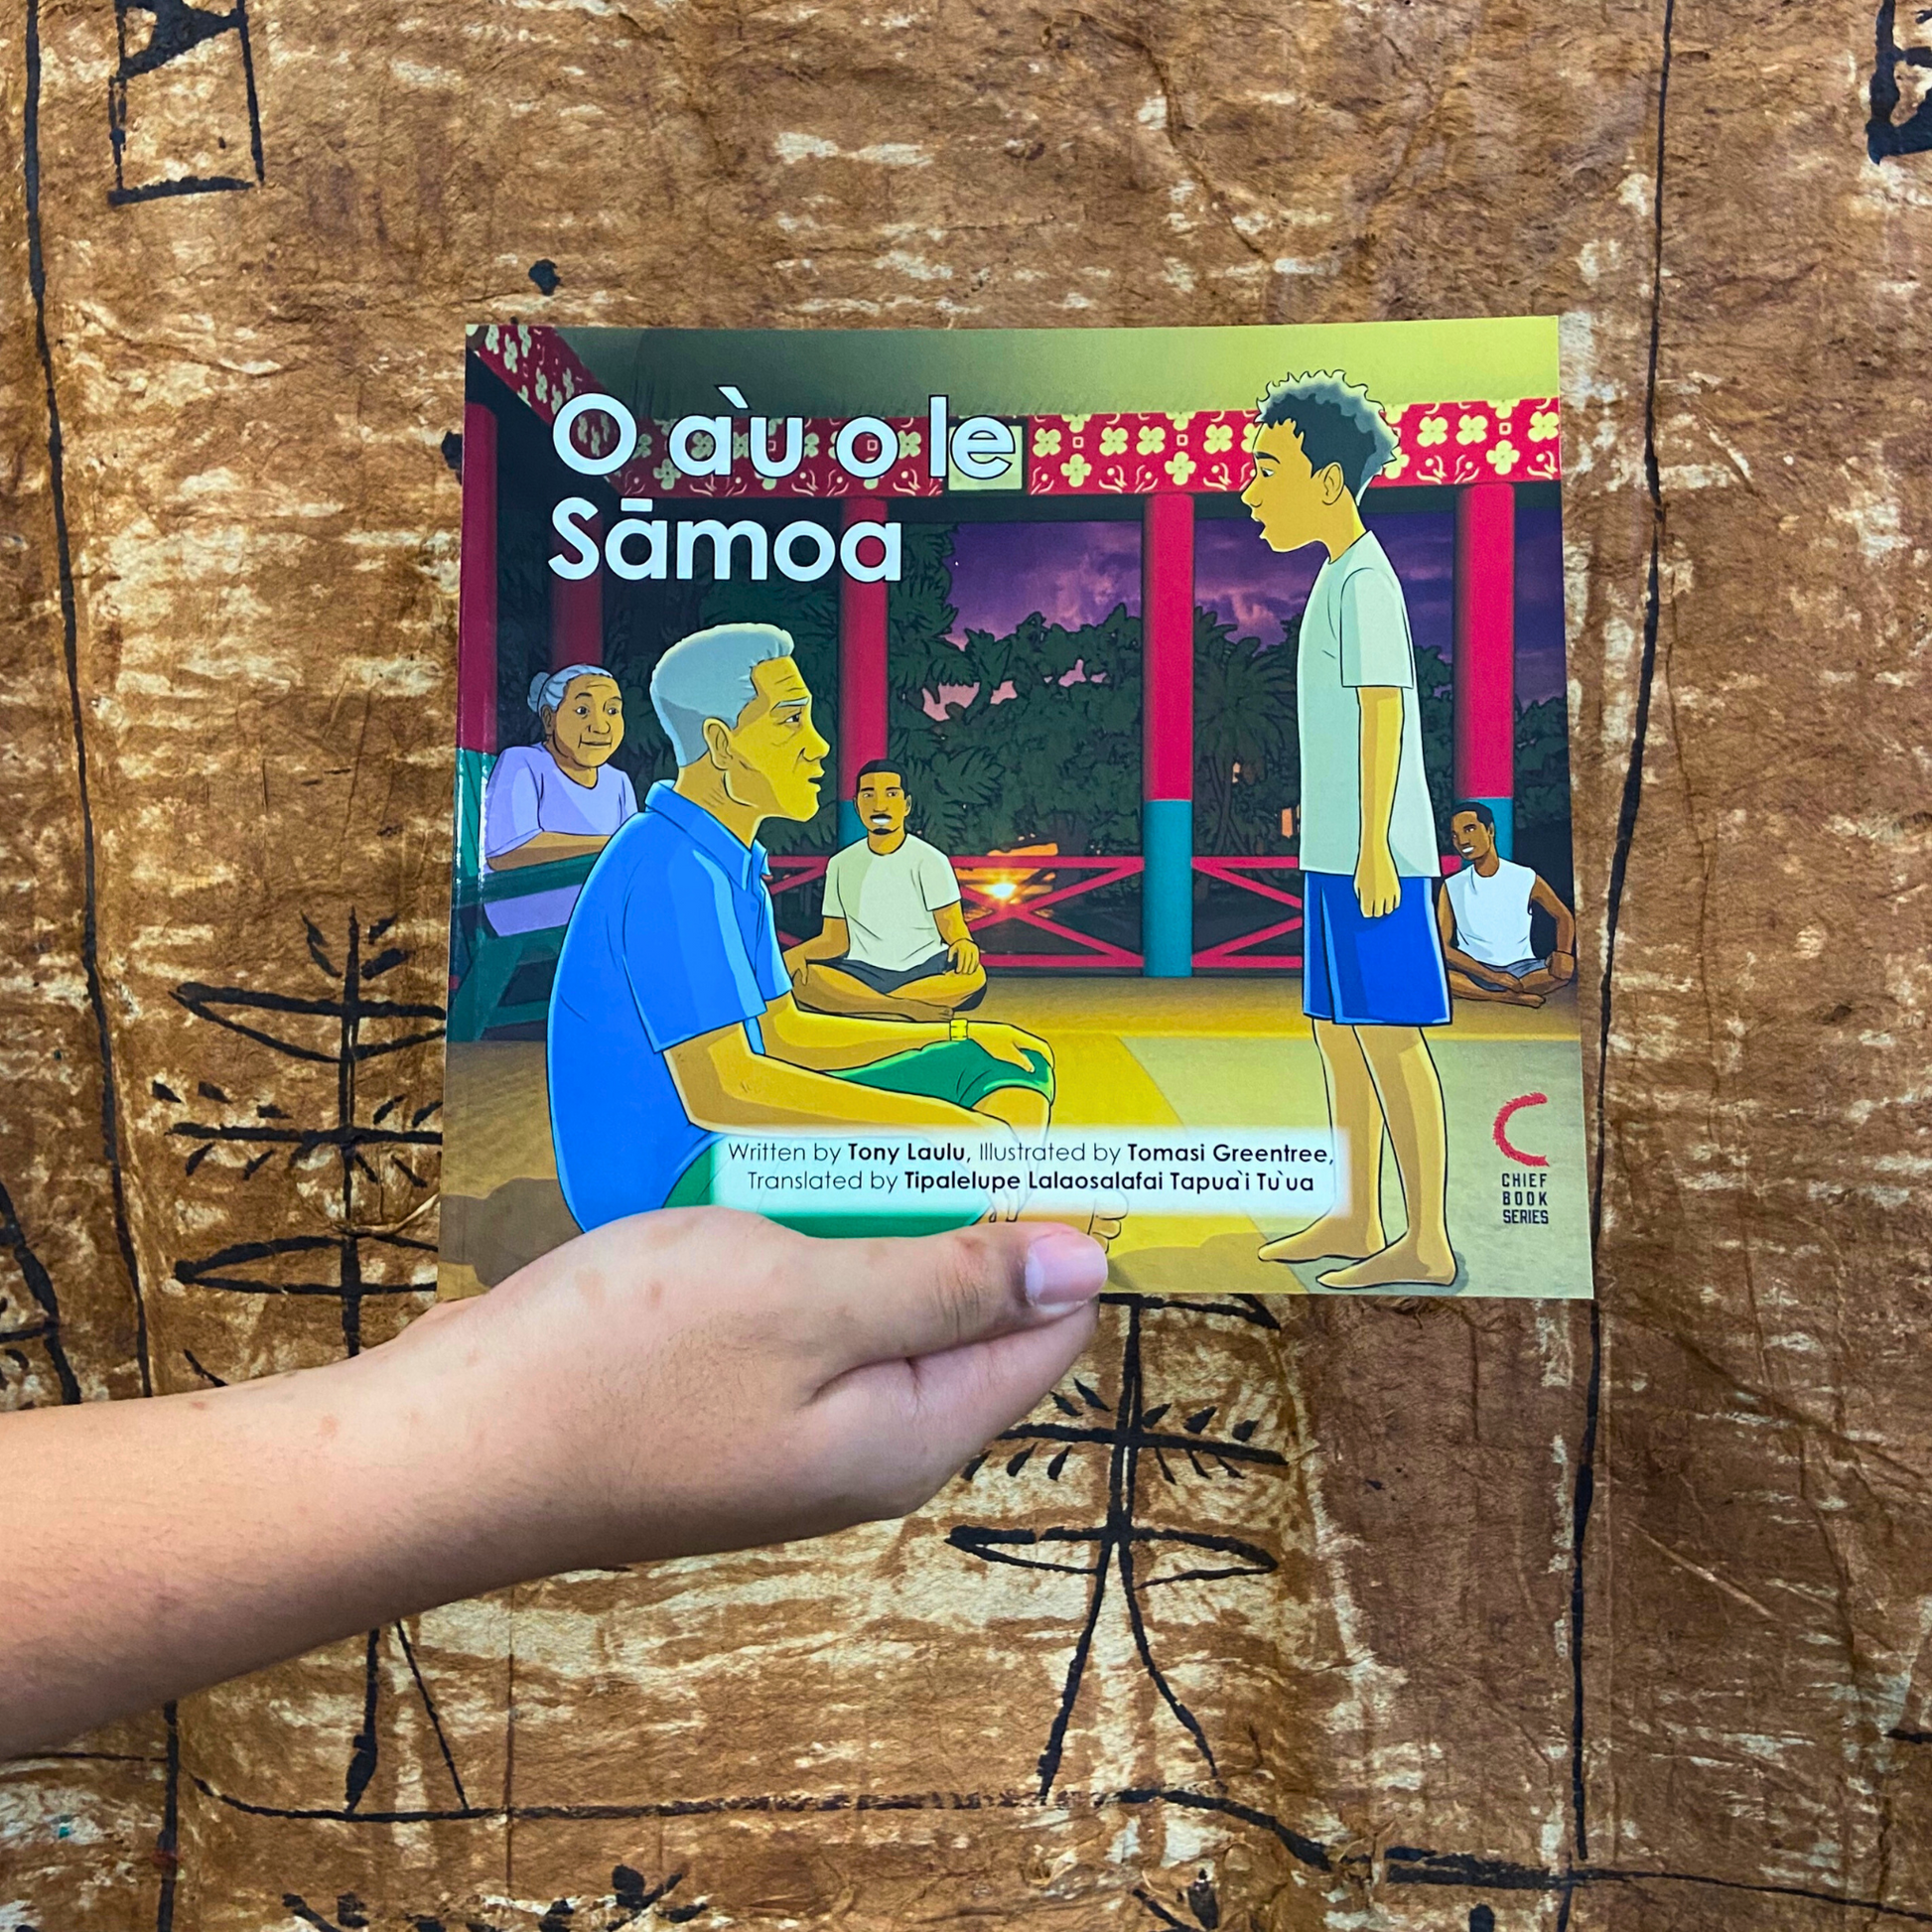 A hand model holding a bilingual Samoan children's book titled "O a’u o le Samoa". The book is an illustration of a young Samoan boy standing directly in front of an elderly man in a Fale Samoa.